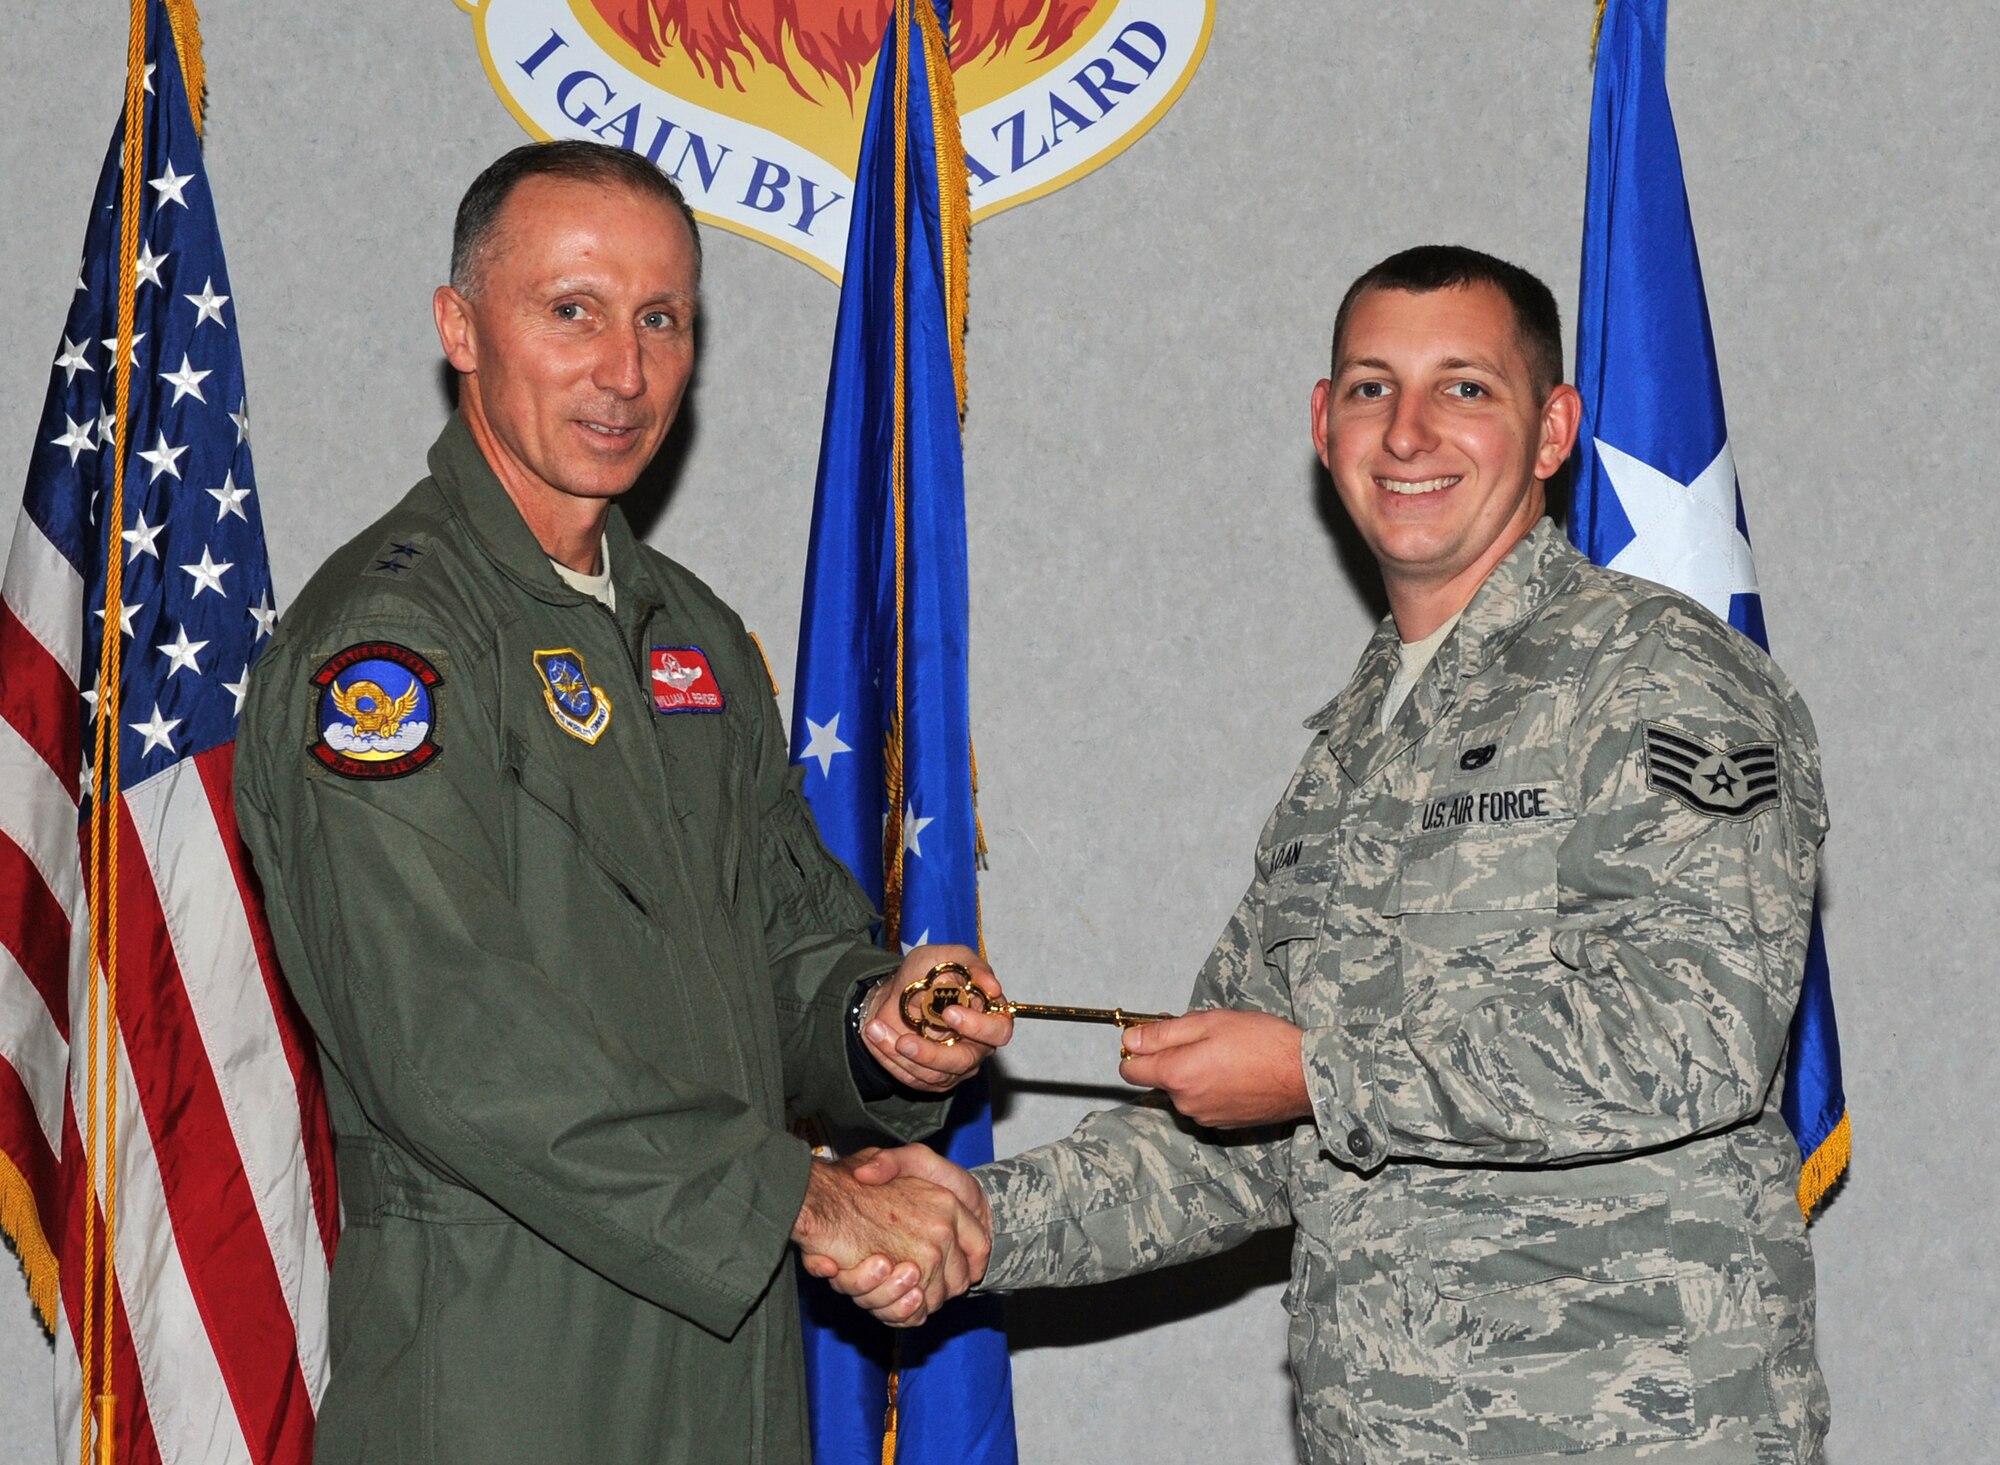 Maj. Gen. William J. Bender, U.S. Air Force Expeditionary Center commander, presents Staff Sgt. Ryan Sloan, 317th Aircraft Maintenance Squadron, with the honorary key to the newest C-130J Dec. 13, 2012, at Dyess Air Force Base, Texas. This is the 24th C-130J of 28 to be delivered to Dyess by 2013, replacing the legacy fleet of C-130Hs. Once the final aircraft is delivered, Dyess will be home to the largest C-130J fleet in the world. (U.S. Air Force photo by Airman 1st Class Peter Thompson/Released)